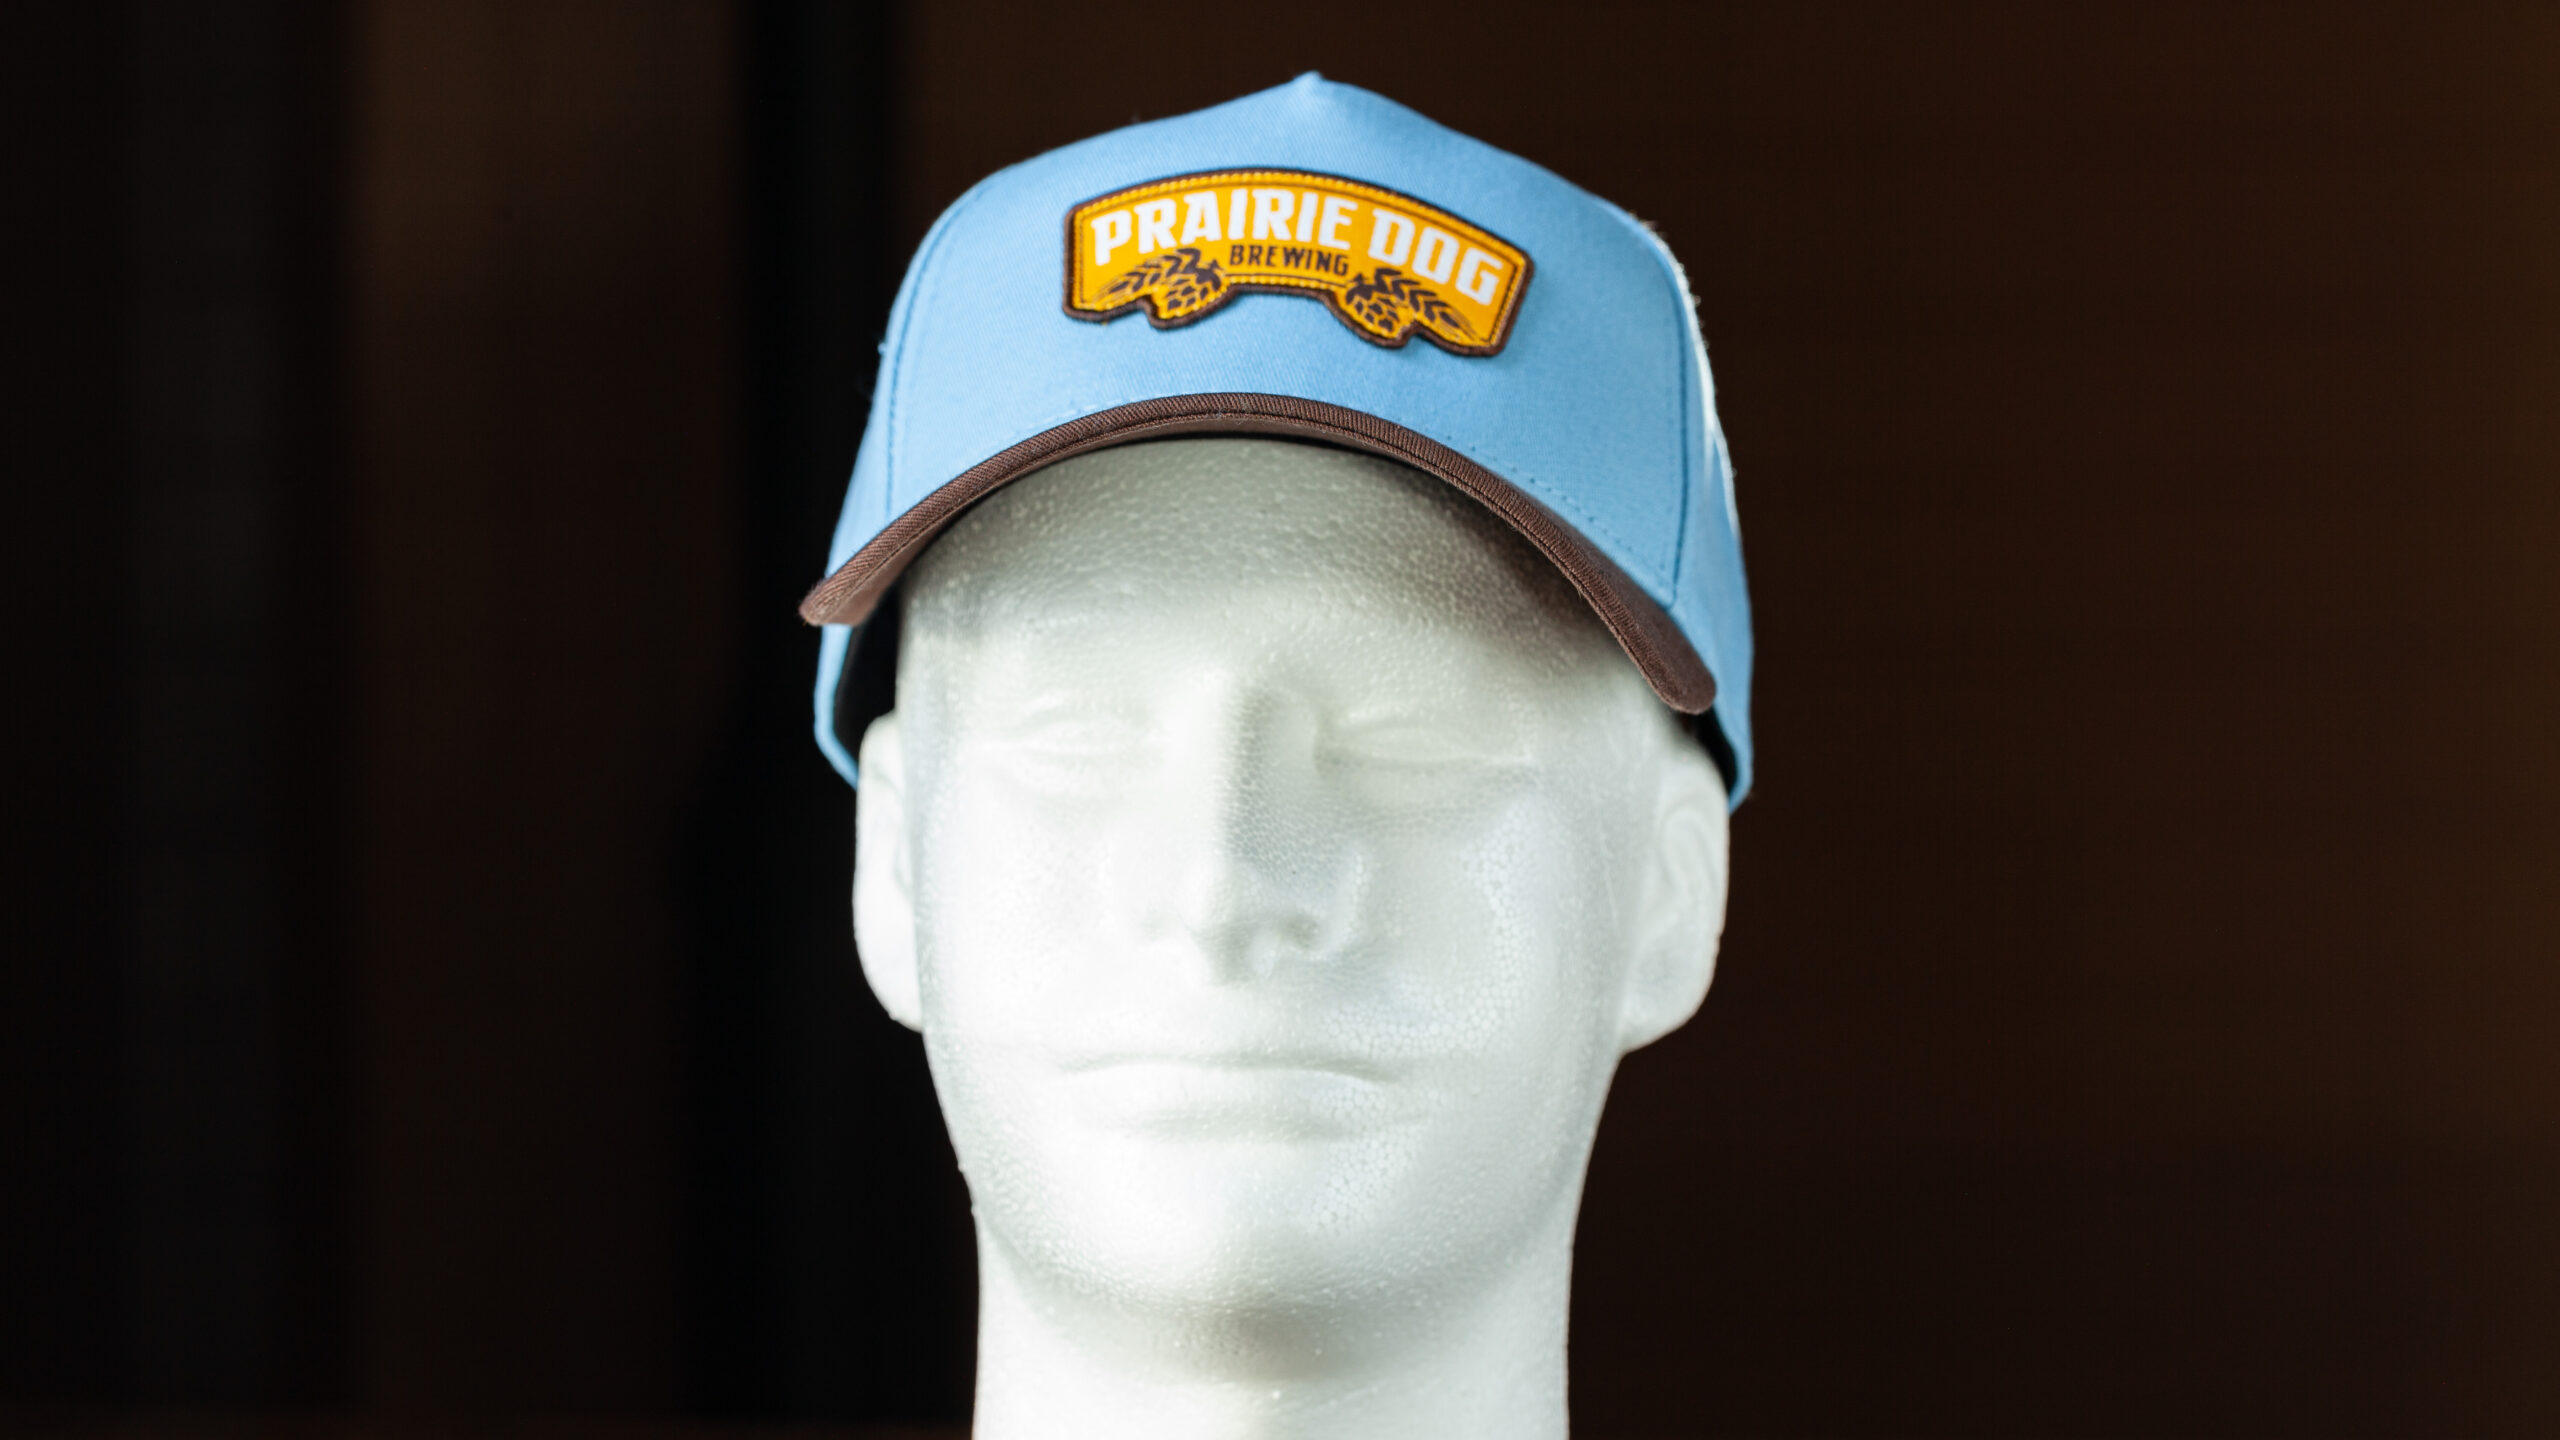 This Prairie Dog® Brewing hat is the perfect addition to any outfit (we think it may even jazz up a suit and tie!. The blue is reminiscent of the prairie sky as it meets the prairie lands of the brown depicting the Alberta skies and fields where our beer ingredients, we all know and love! The slogan gives a nod to your favourite local brewery and lets everyone know what you like.